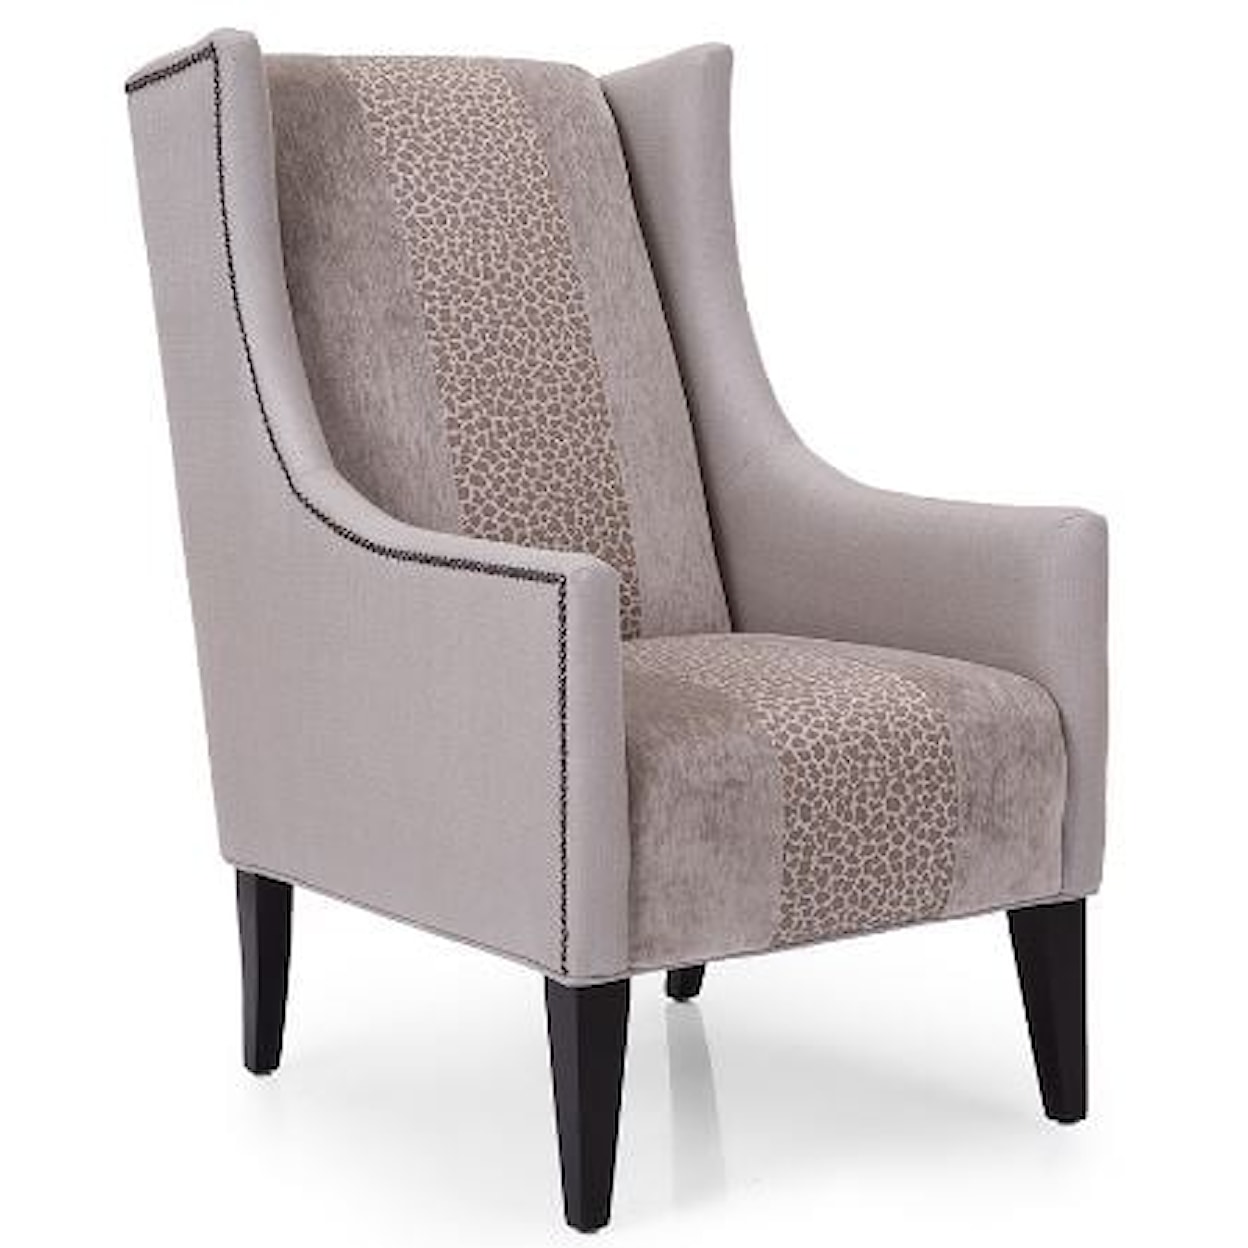 Taelor Designs 2310 Wing Chair